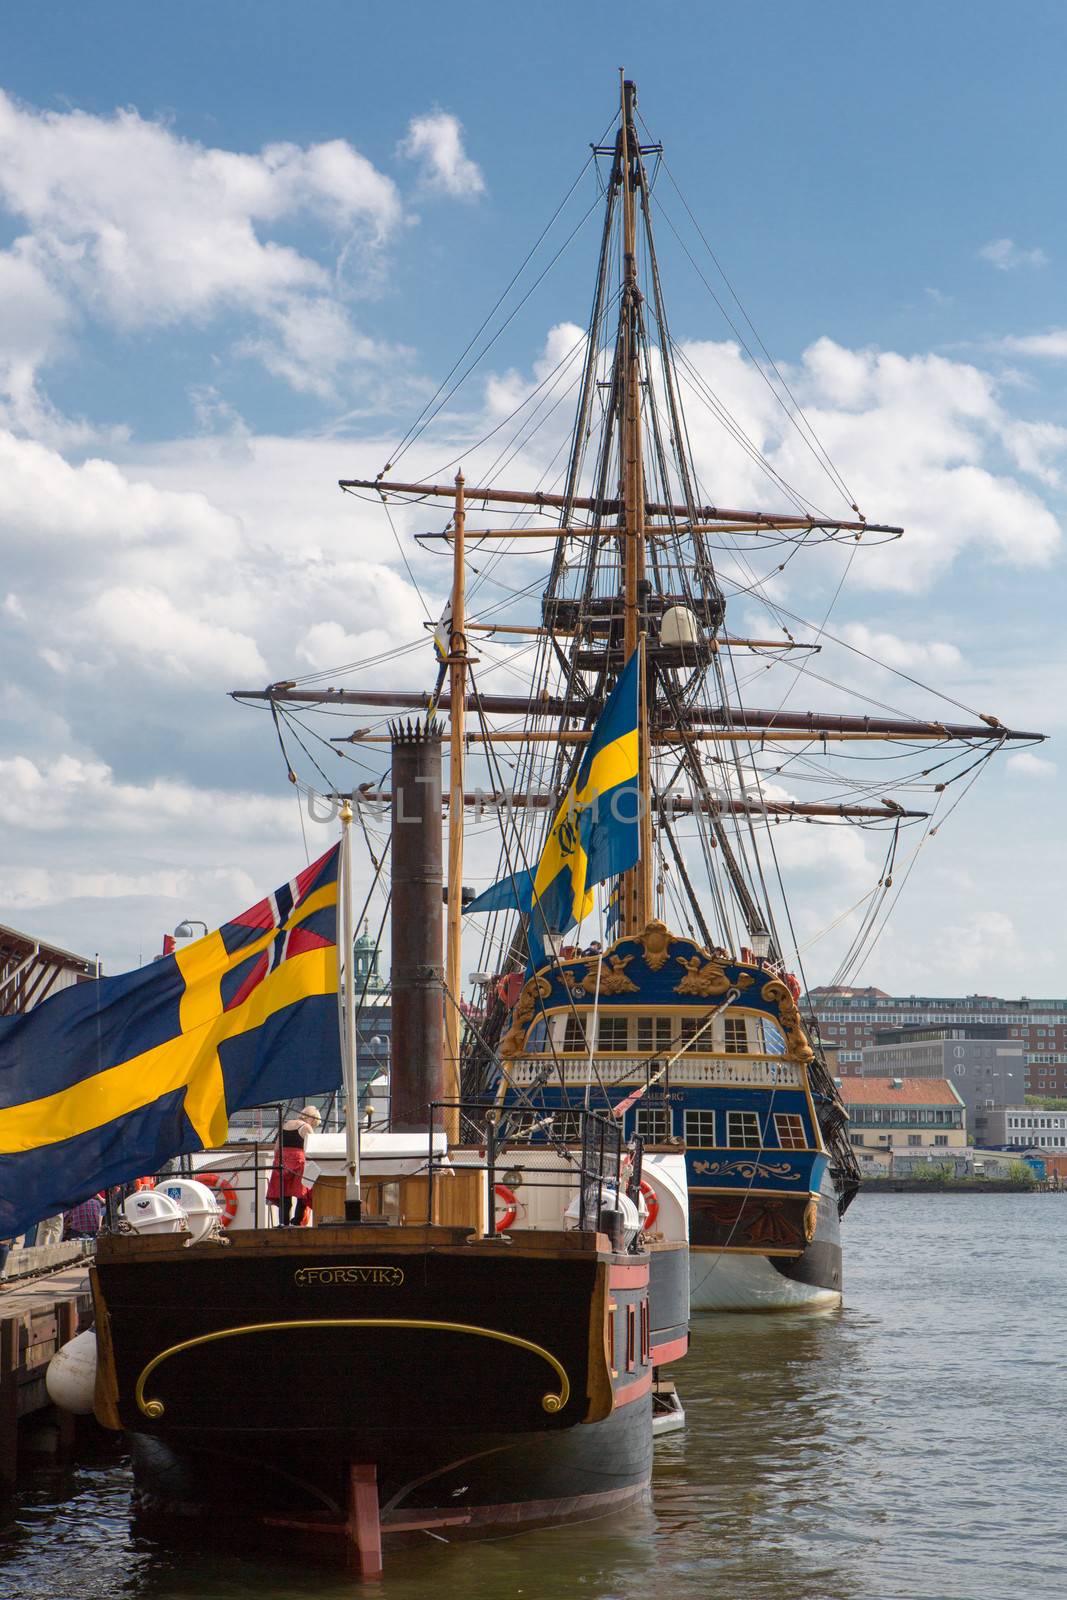 Frigate in harbor of Goteborg, Sweden by watchtheworld